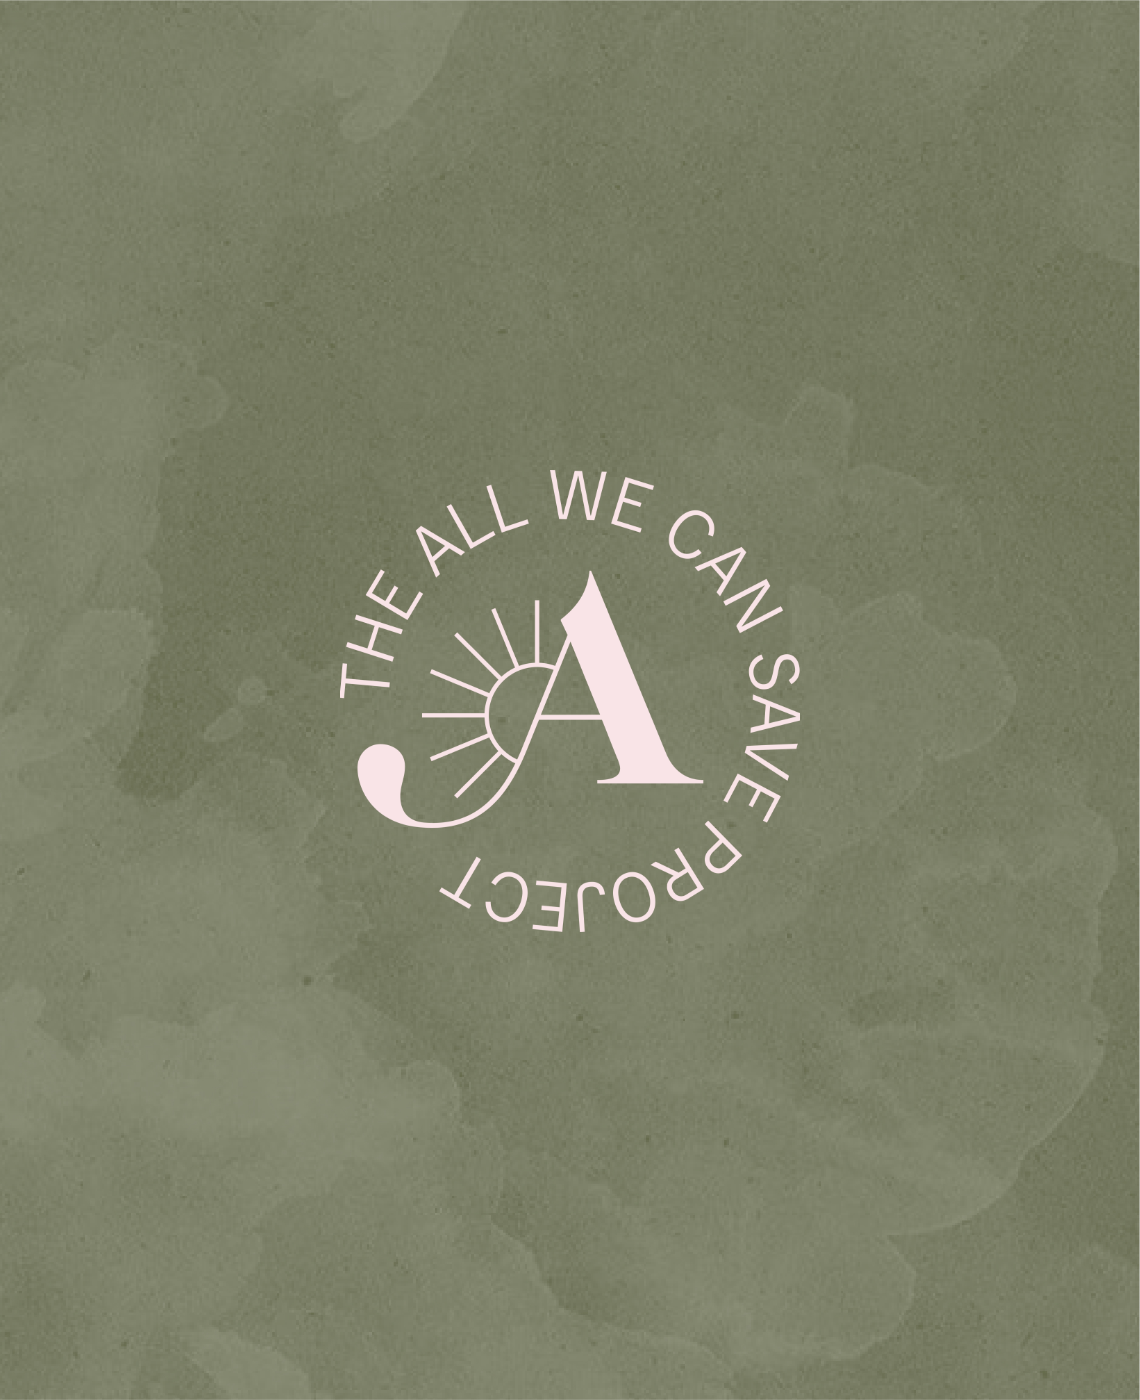 All We Can Save - Ampersand